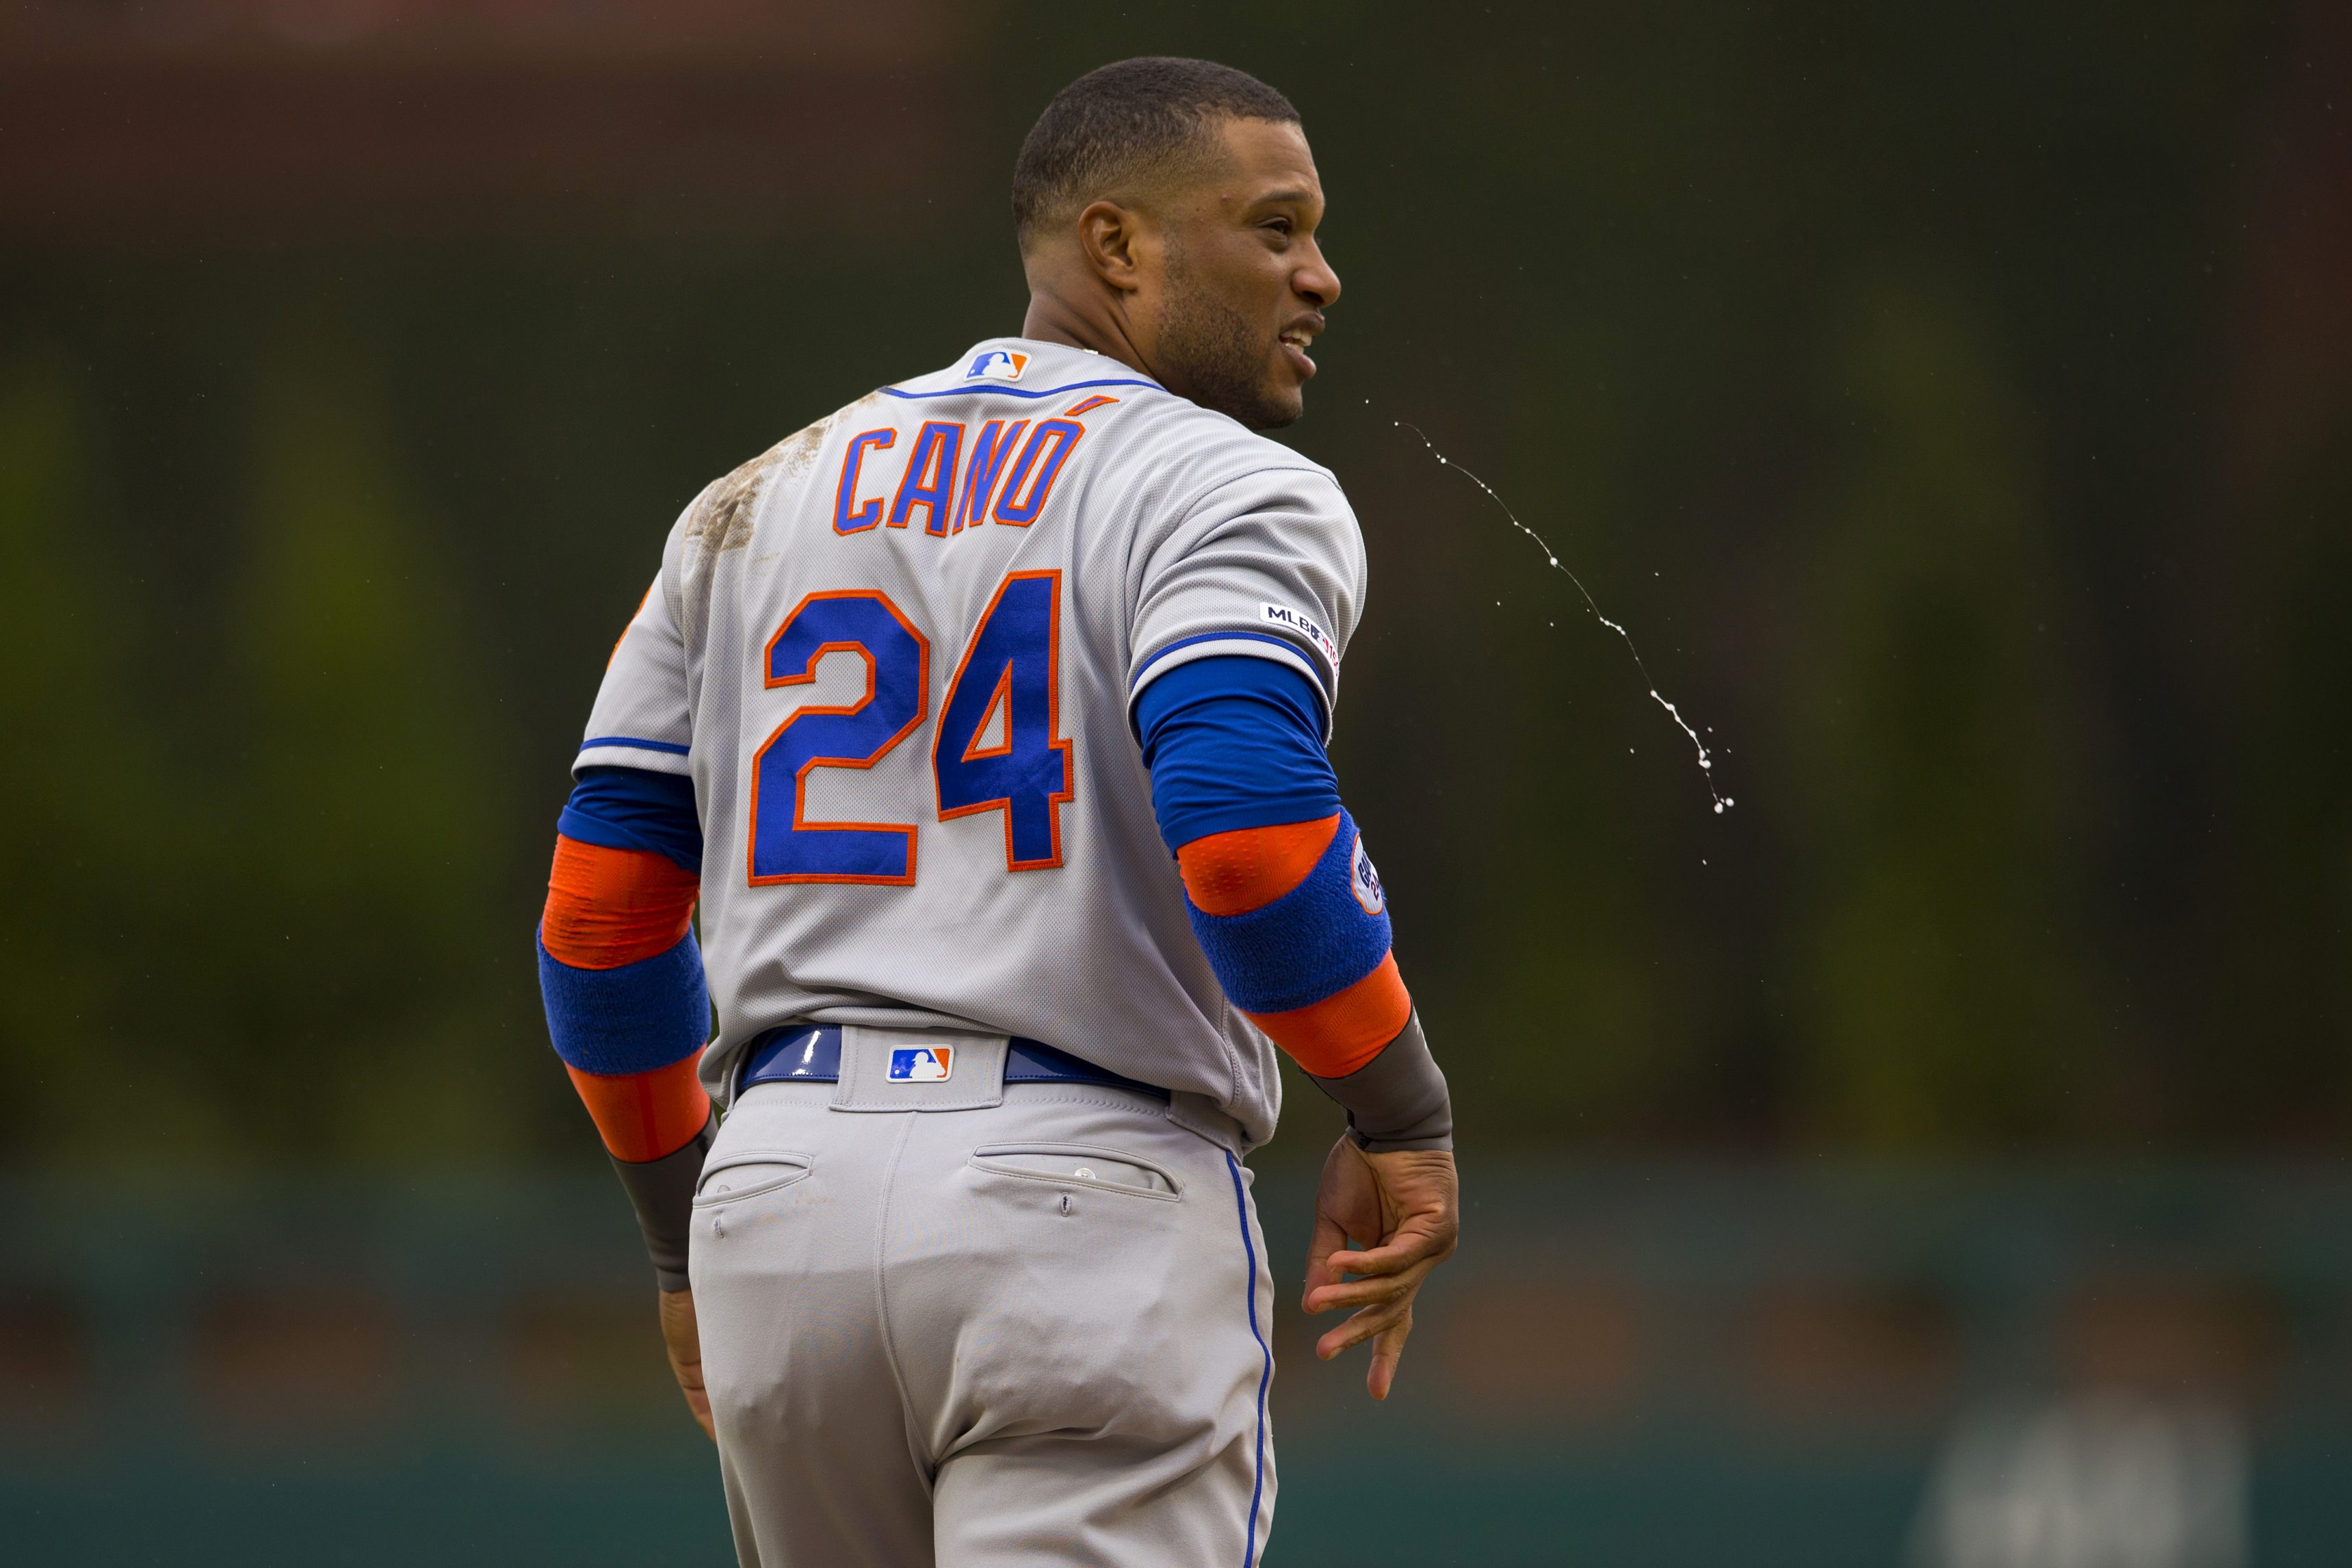 Robinson Cano #24 of the New York Mets spits